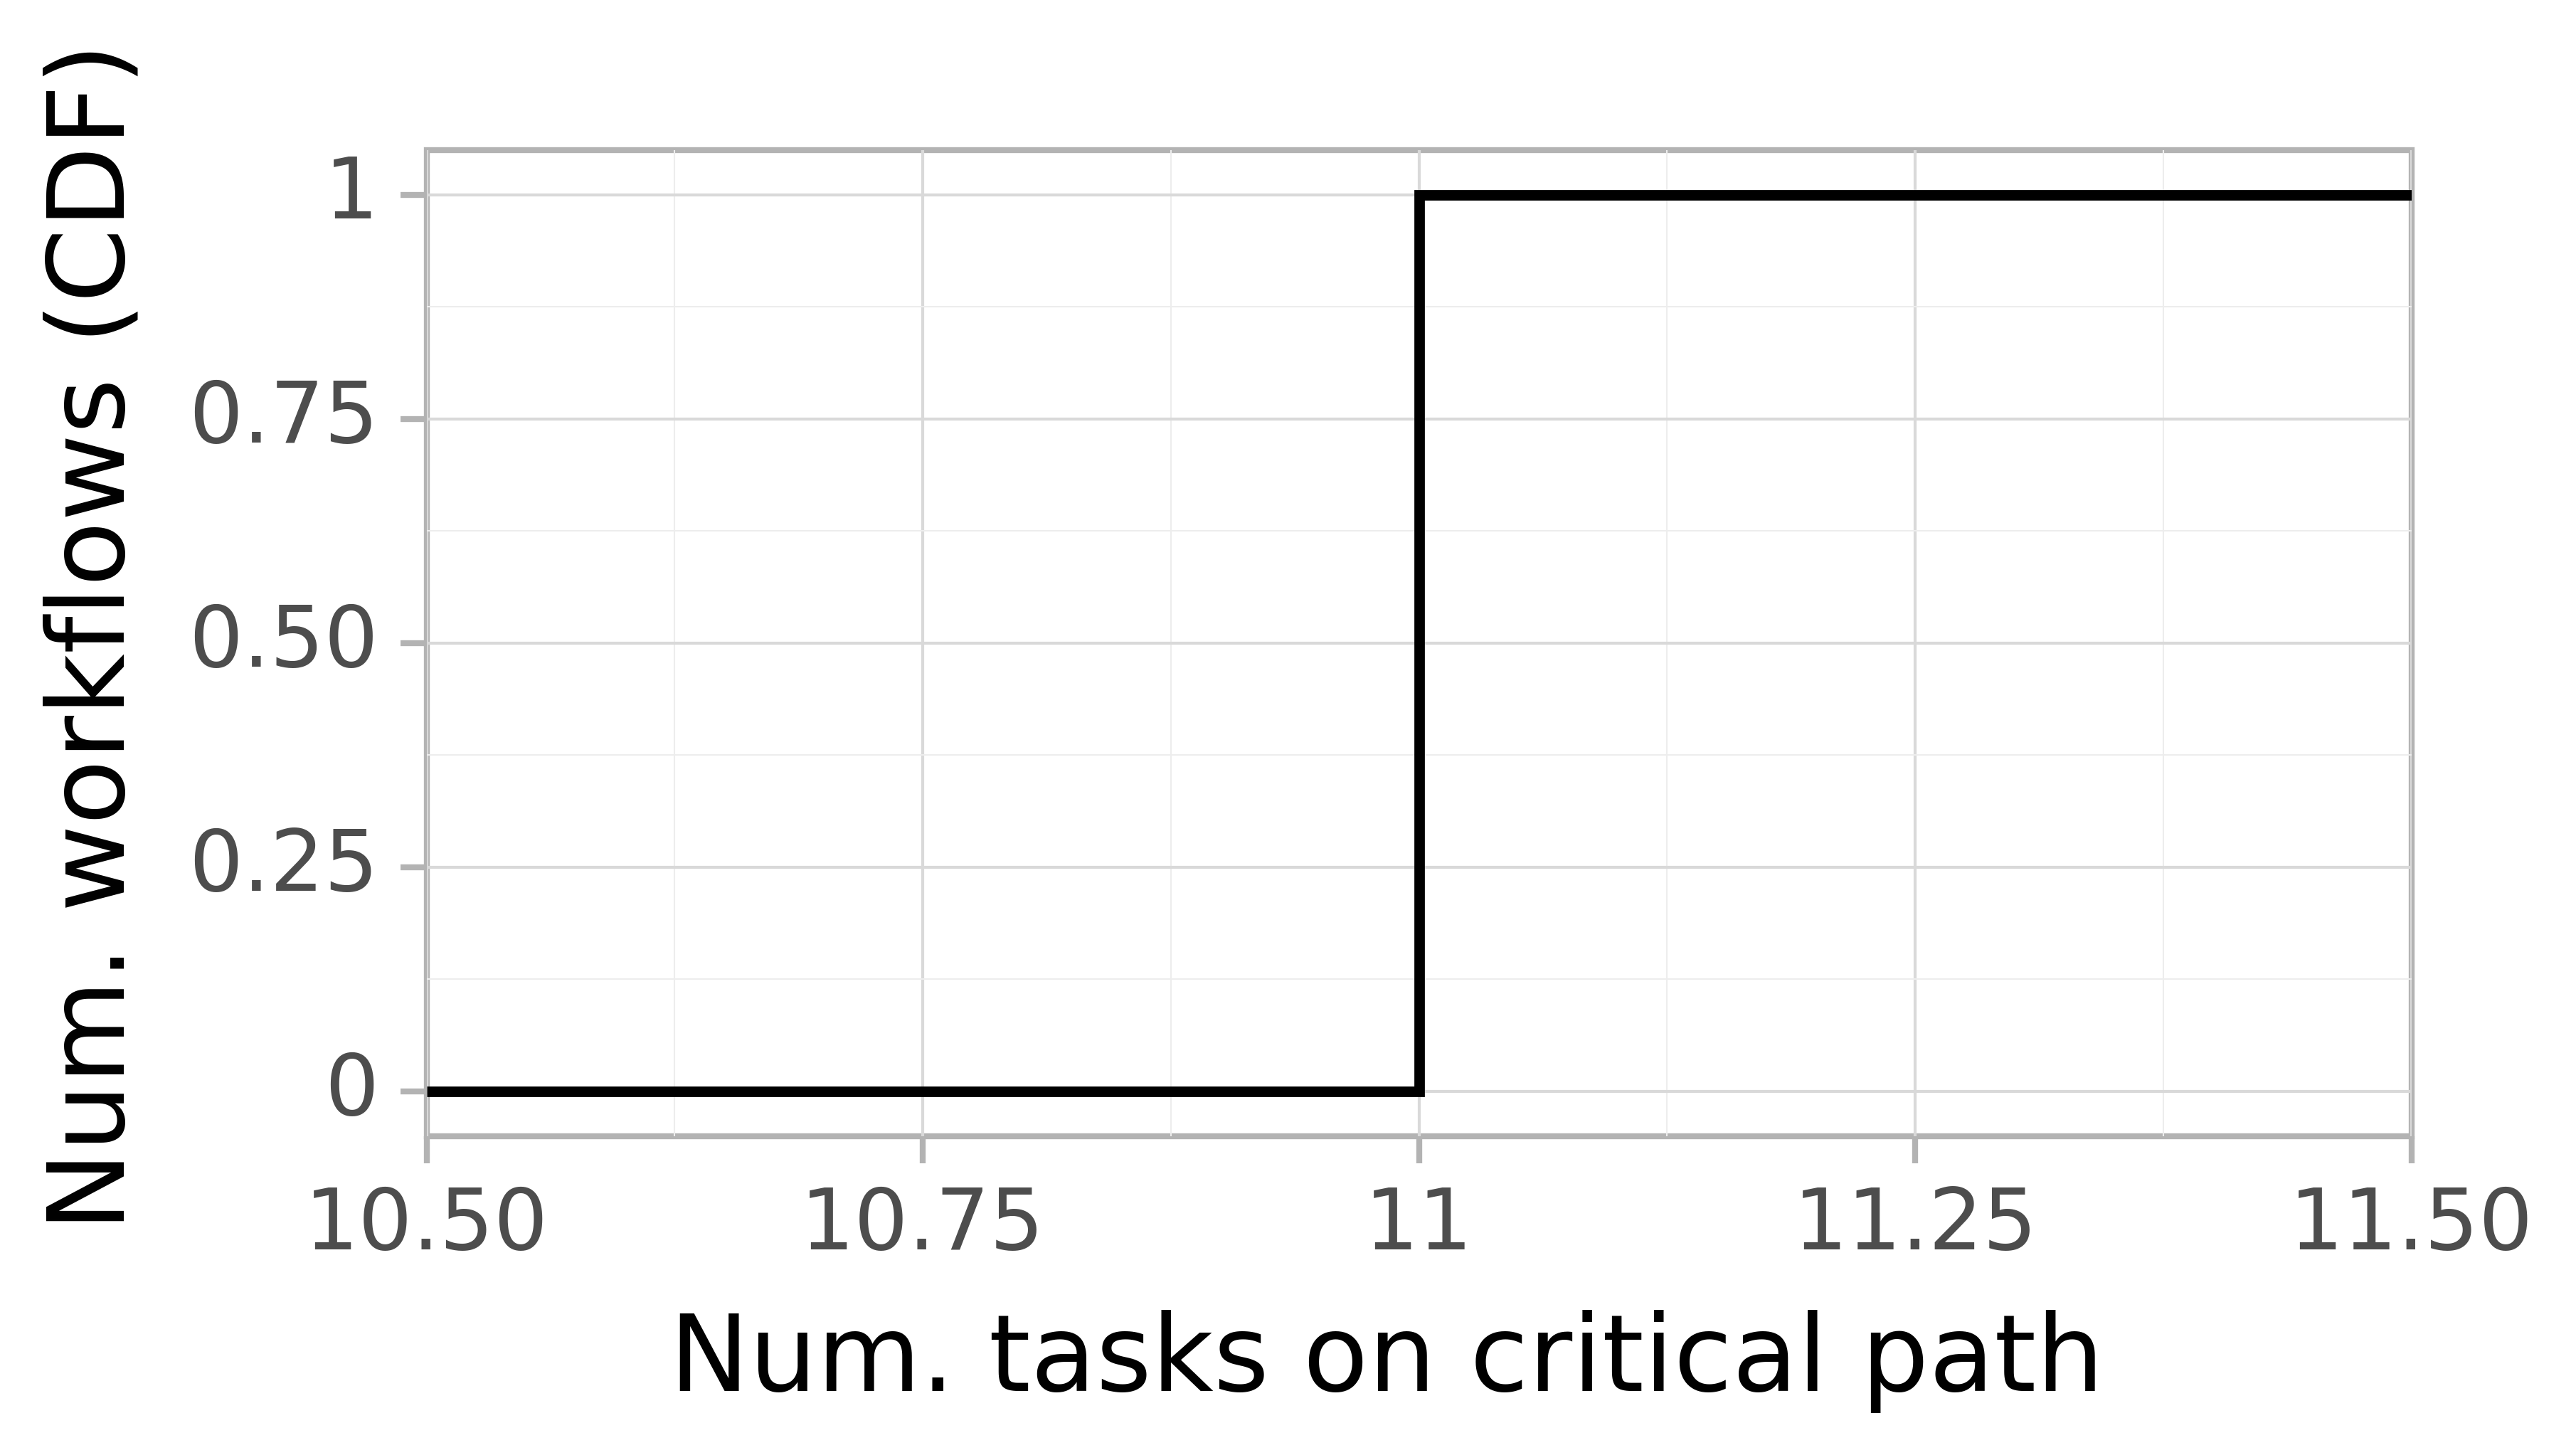 Job critical path task count graph for the workflowhub_montage_ti01-971107n_degree-4-0_osg_schema-0-2_montage-4-0-osg-run009 trace.